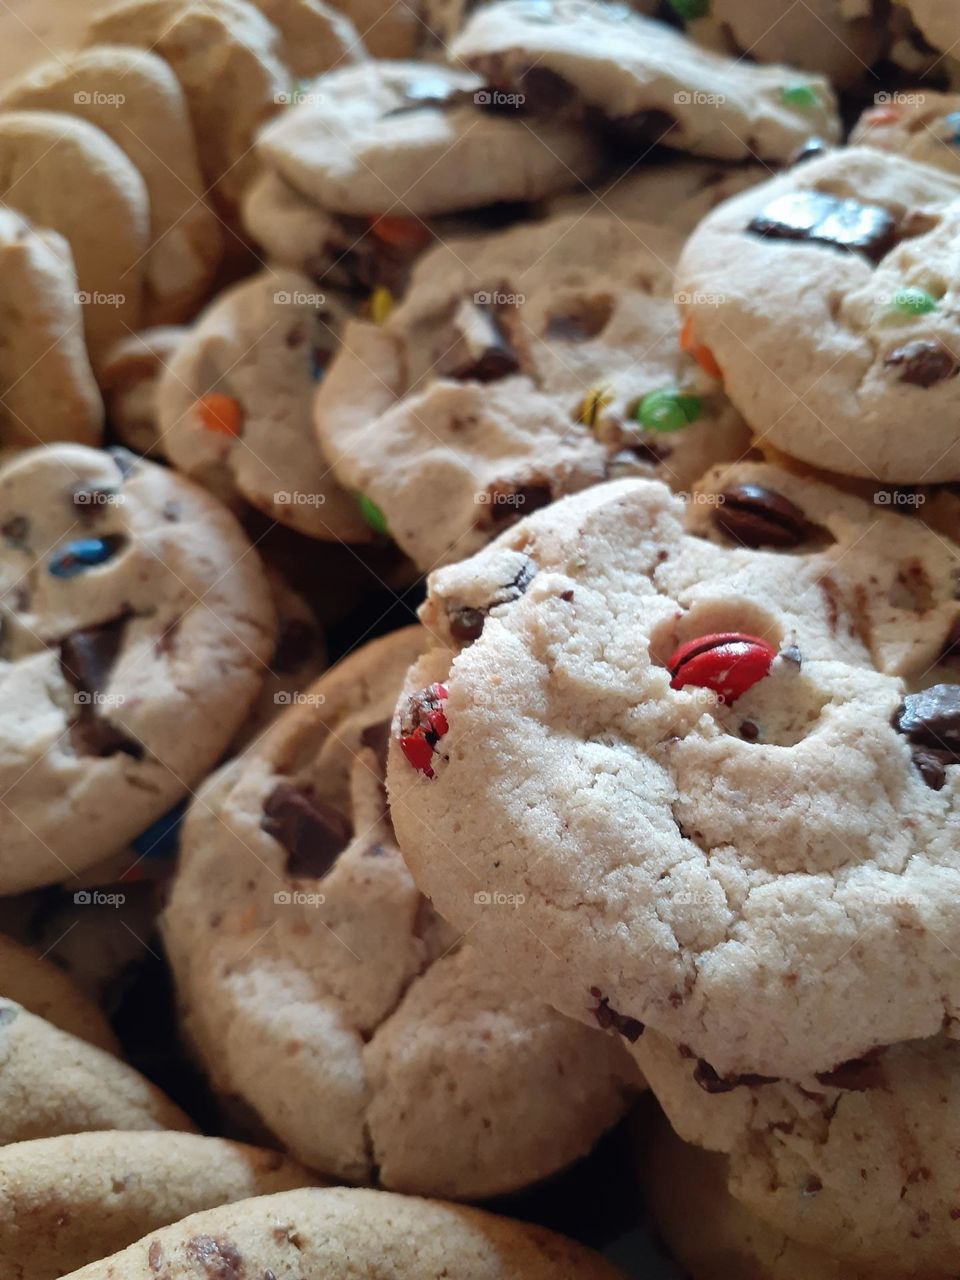 A bunch of delicious chocolate chip cookies with different colored candy coated chocolate in them. Great for dessert.